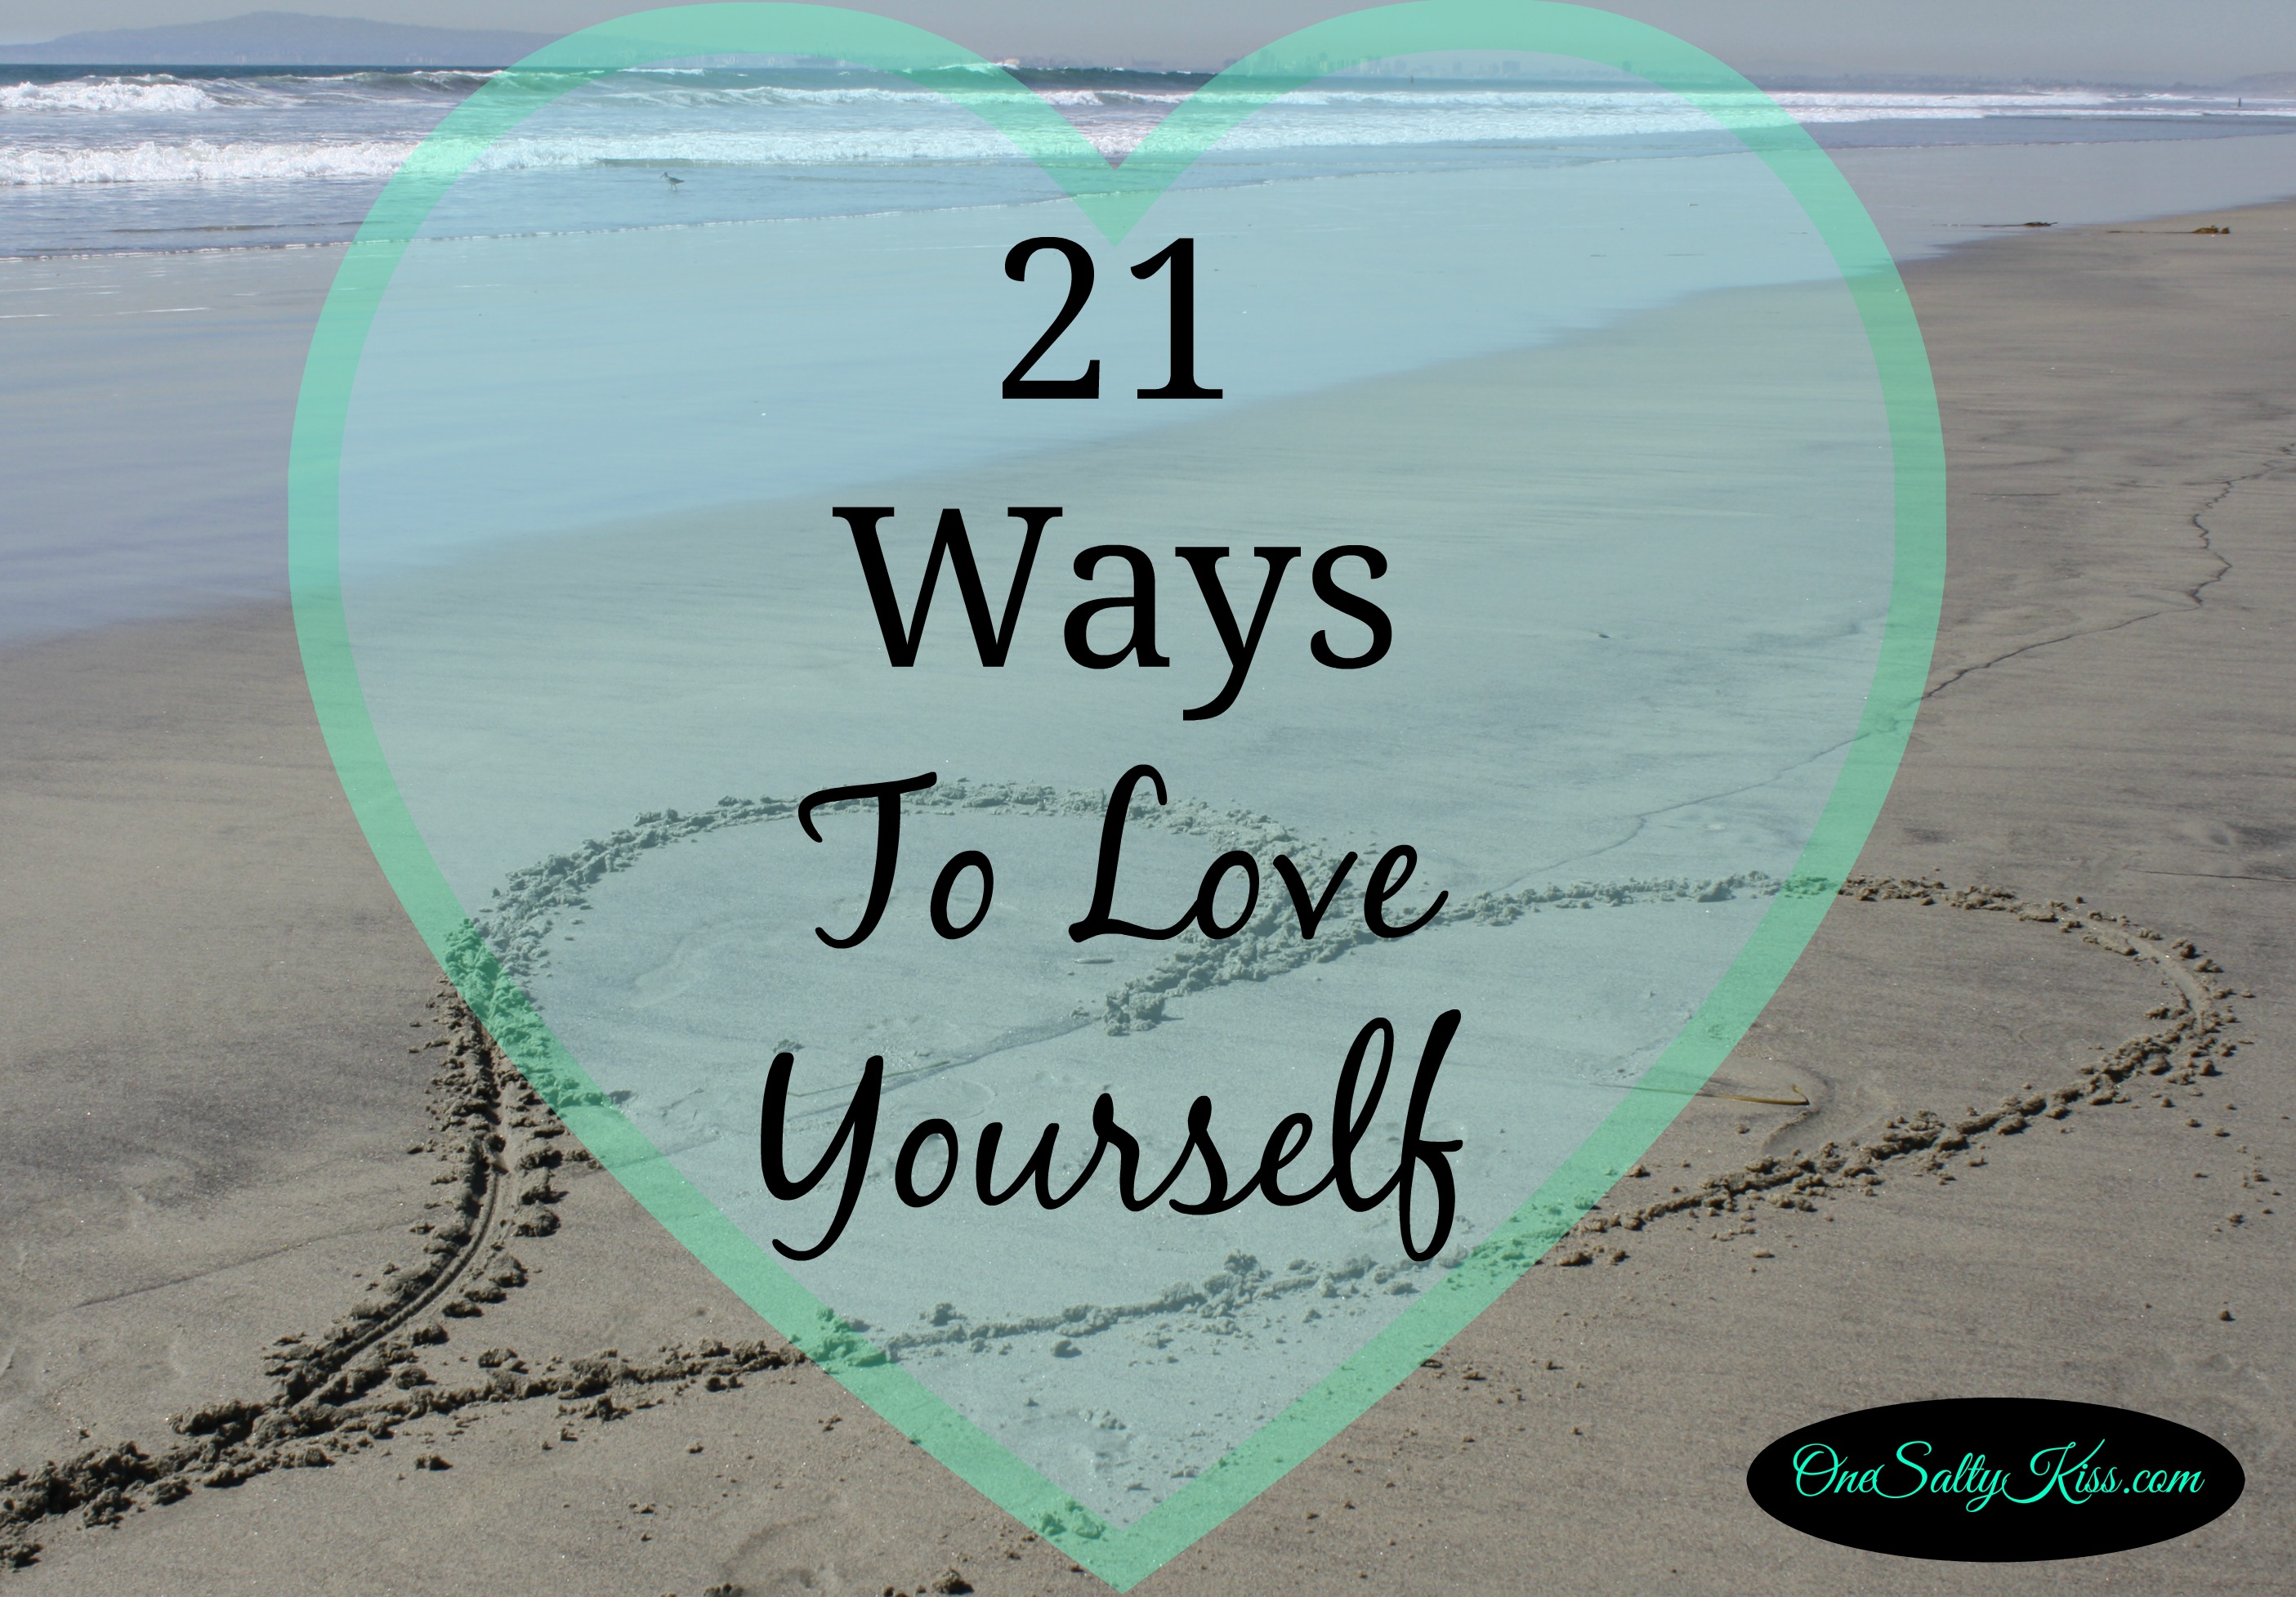 21 Ways to Love Yourself